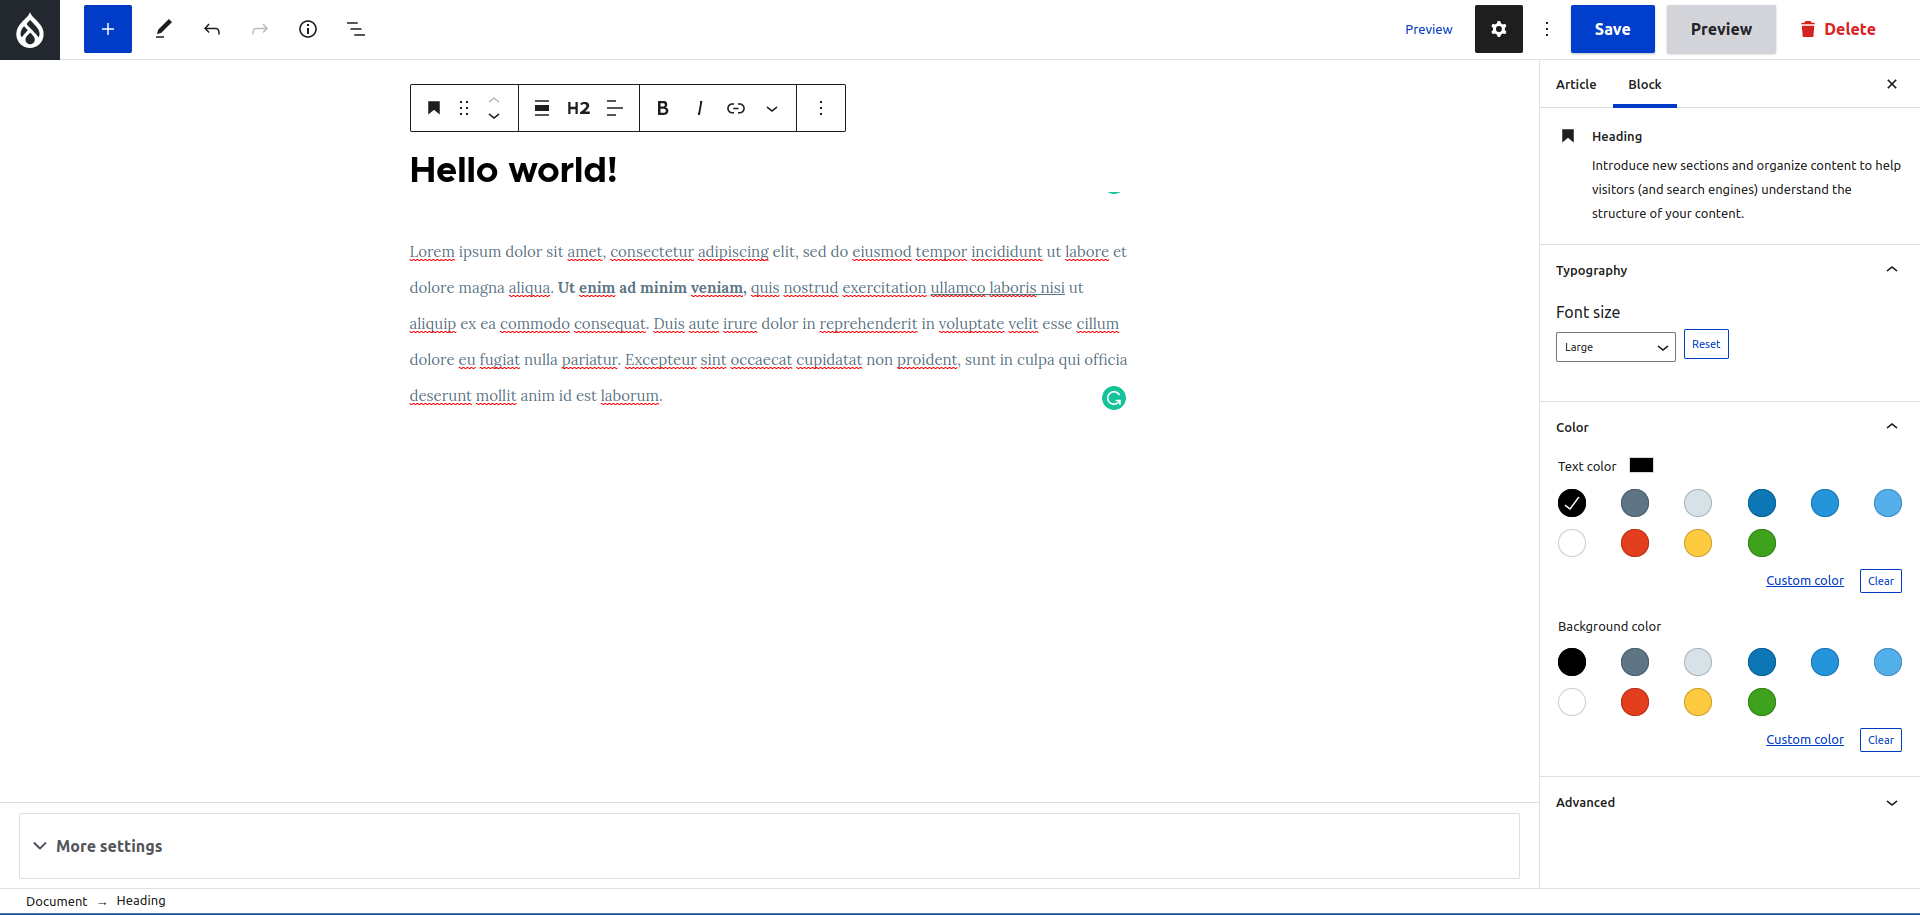 Working on an article using the Drupal Gutenberg module